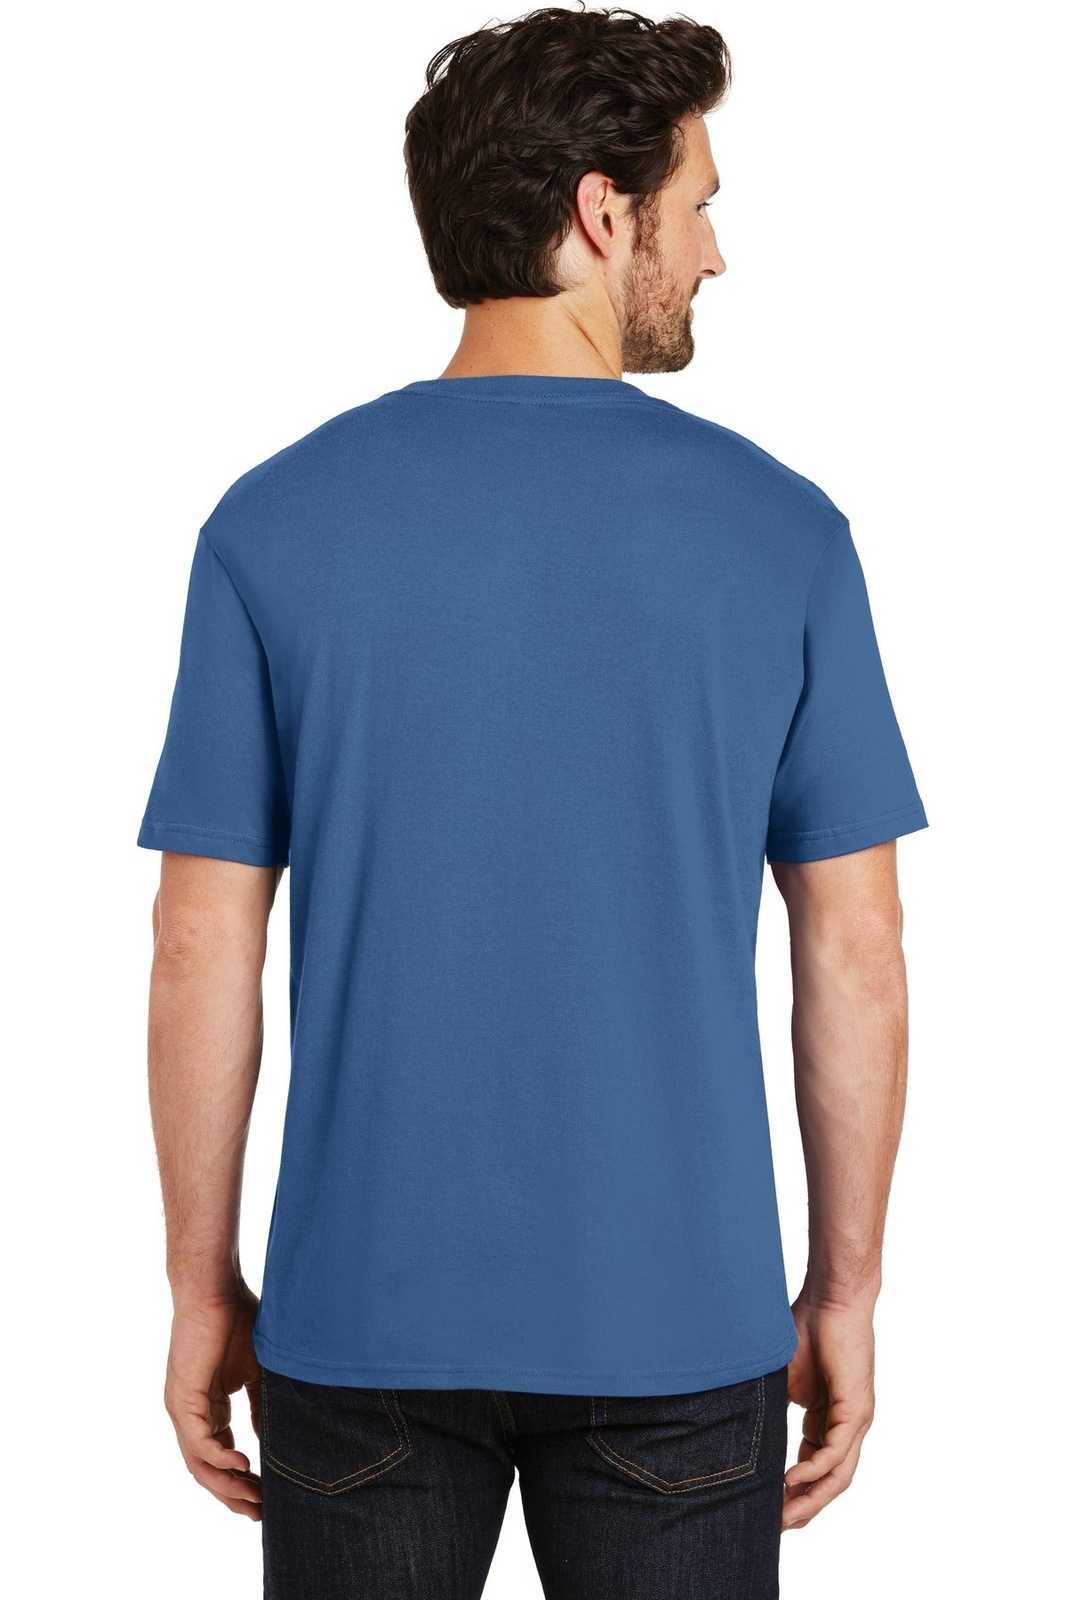 District DT104 Perfect Weight Tee - Maritime Blue - HIT a Double - 2